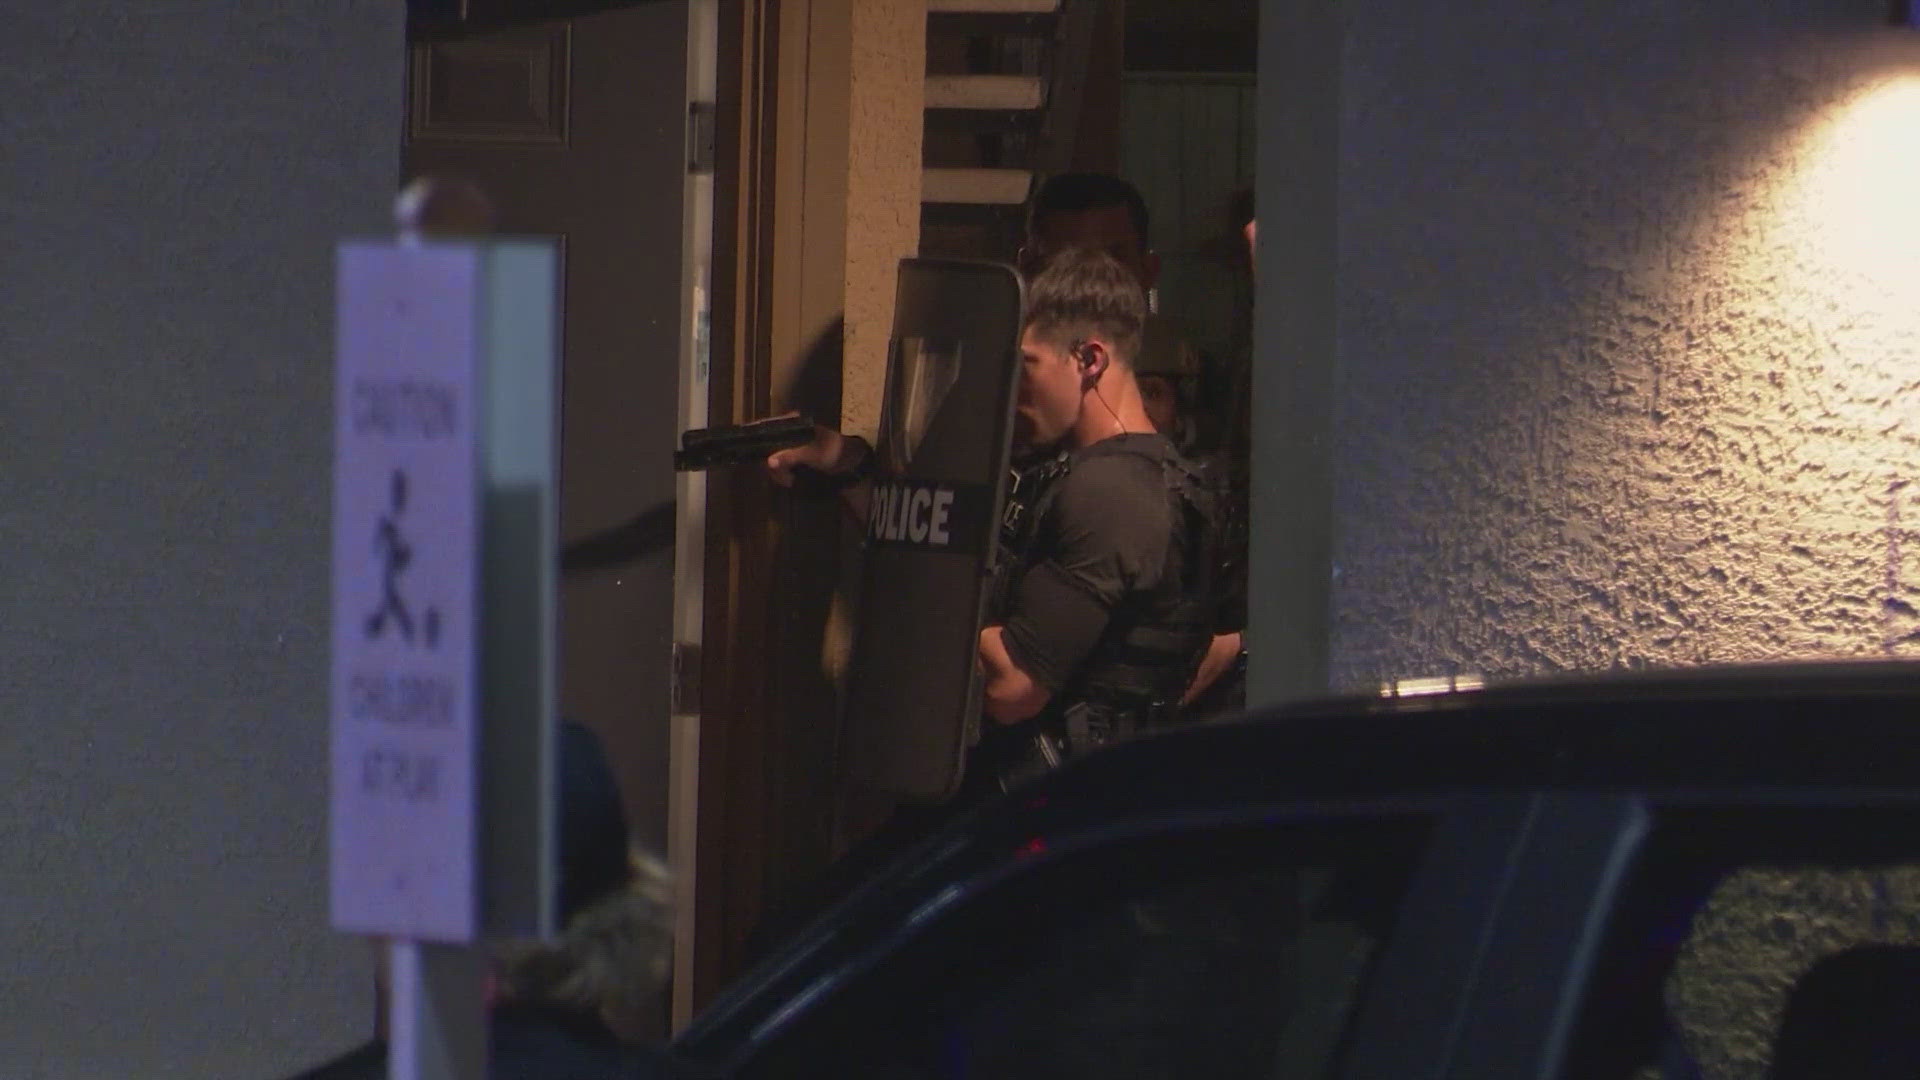 HPD said the suspect and victim got into some kind of fight when the suspect opened fire.